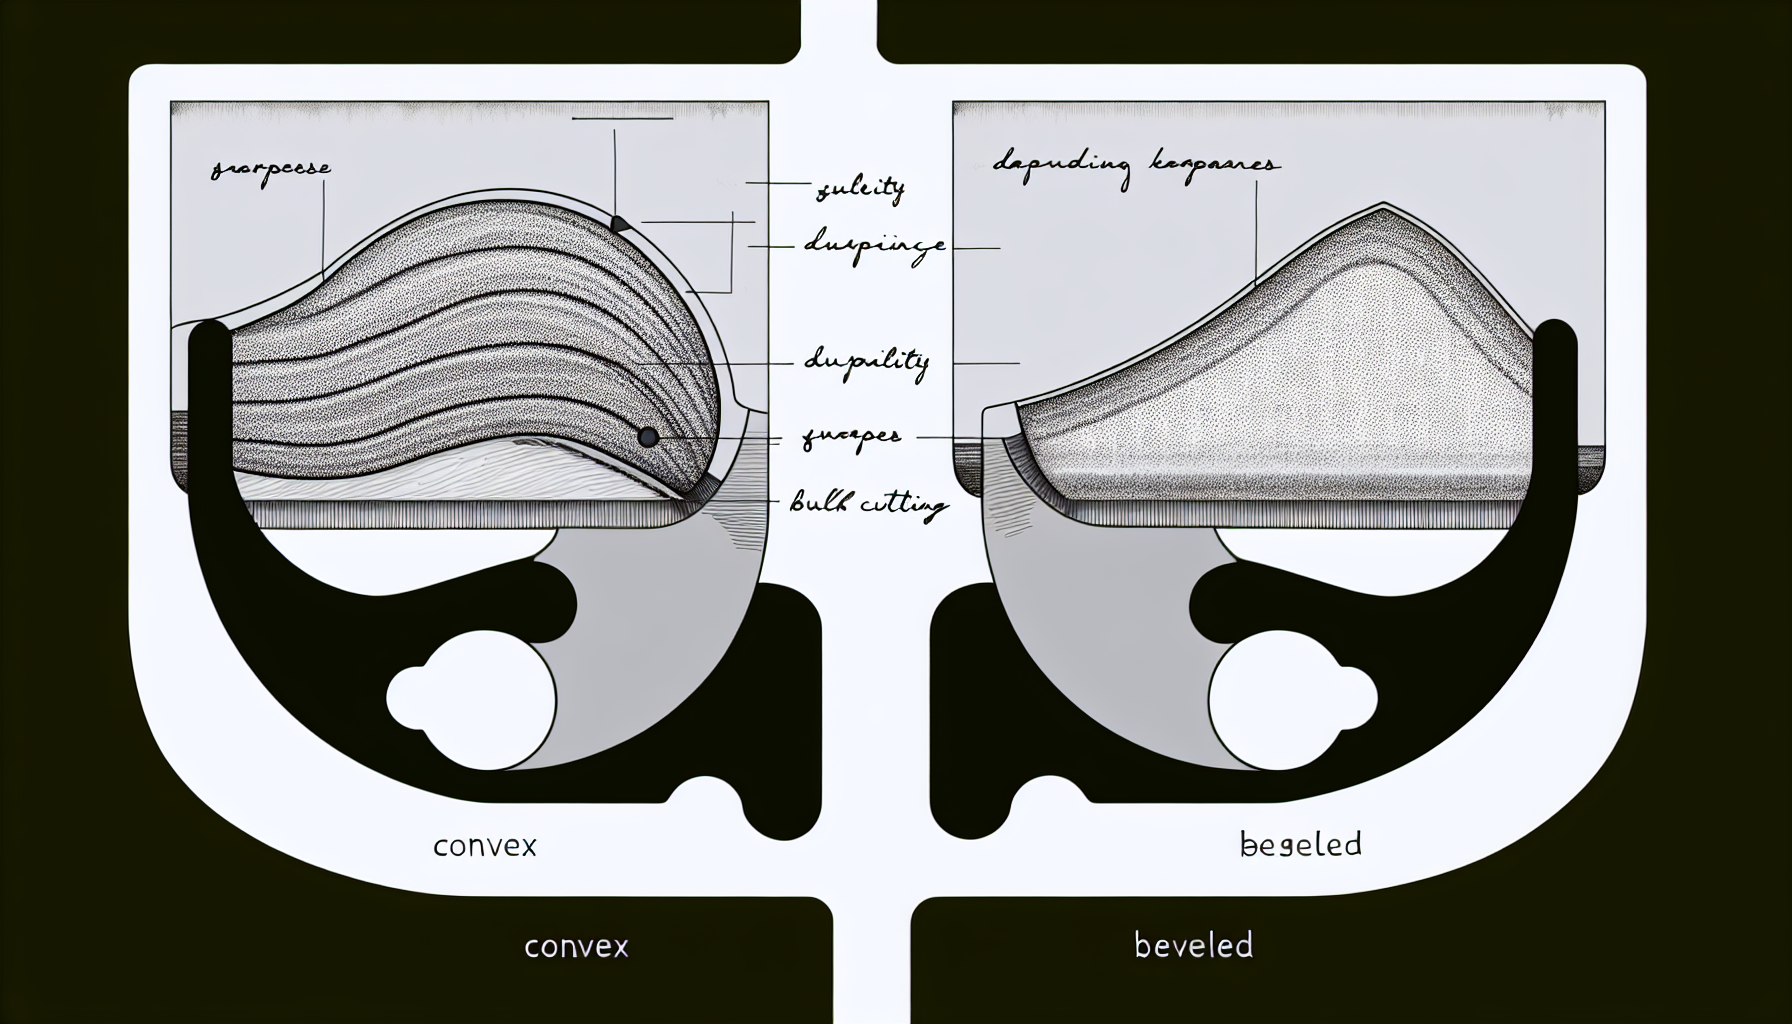 Comparison of convex and beveled blades